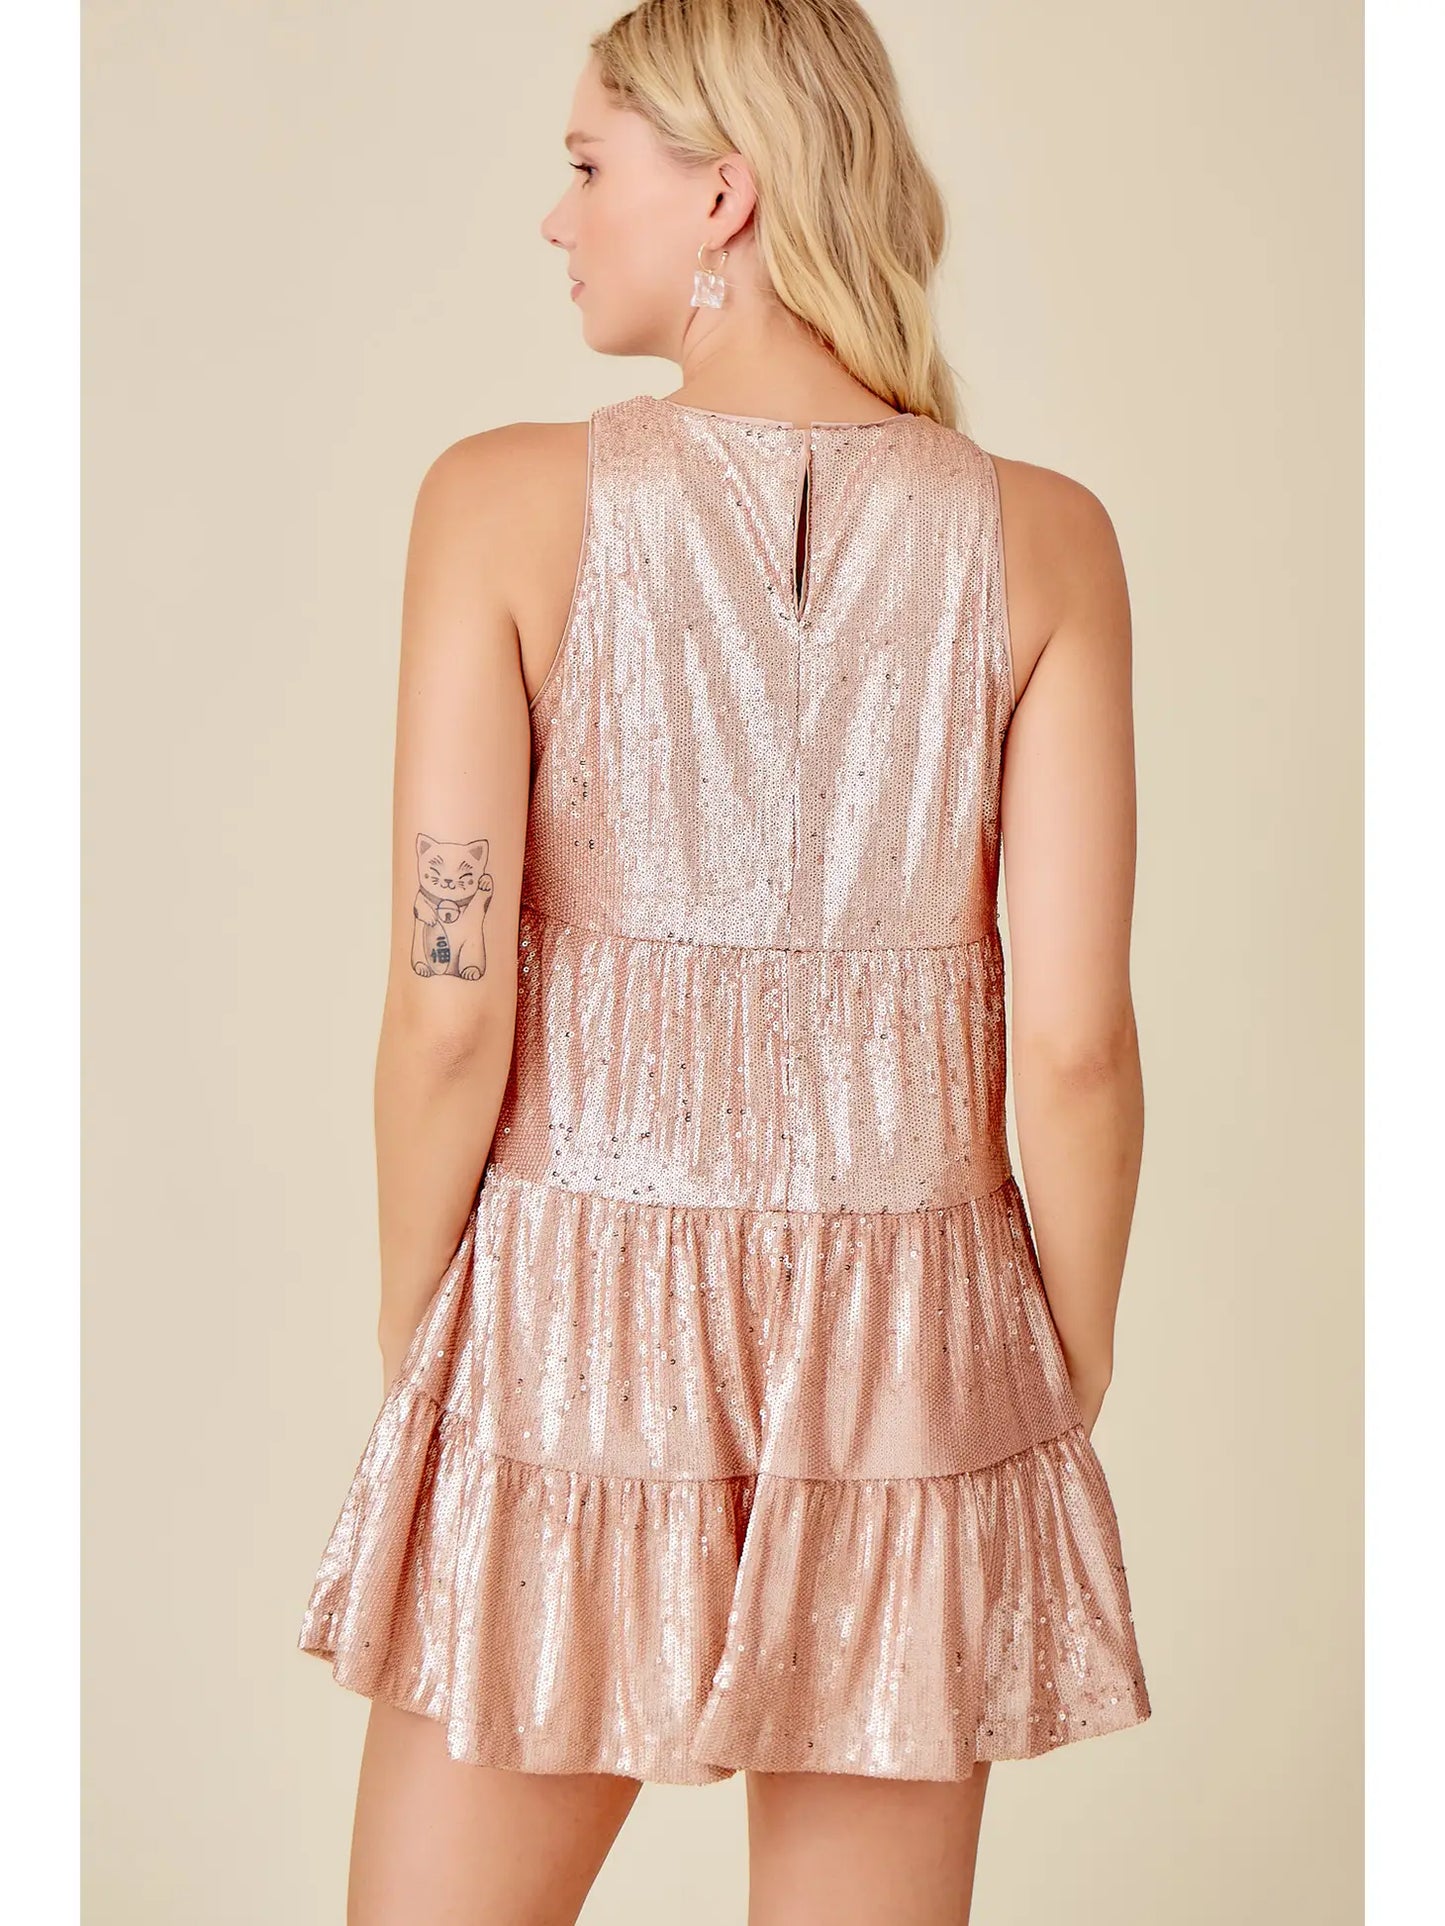 MS Blush Sequin Tiered Flare Dress